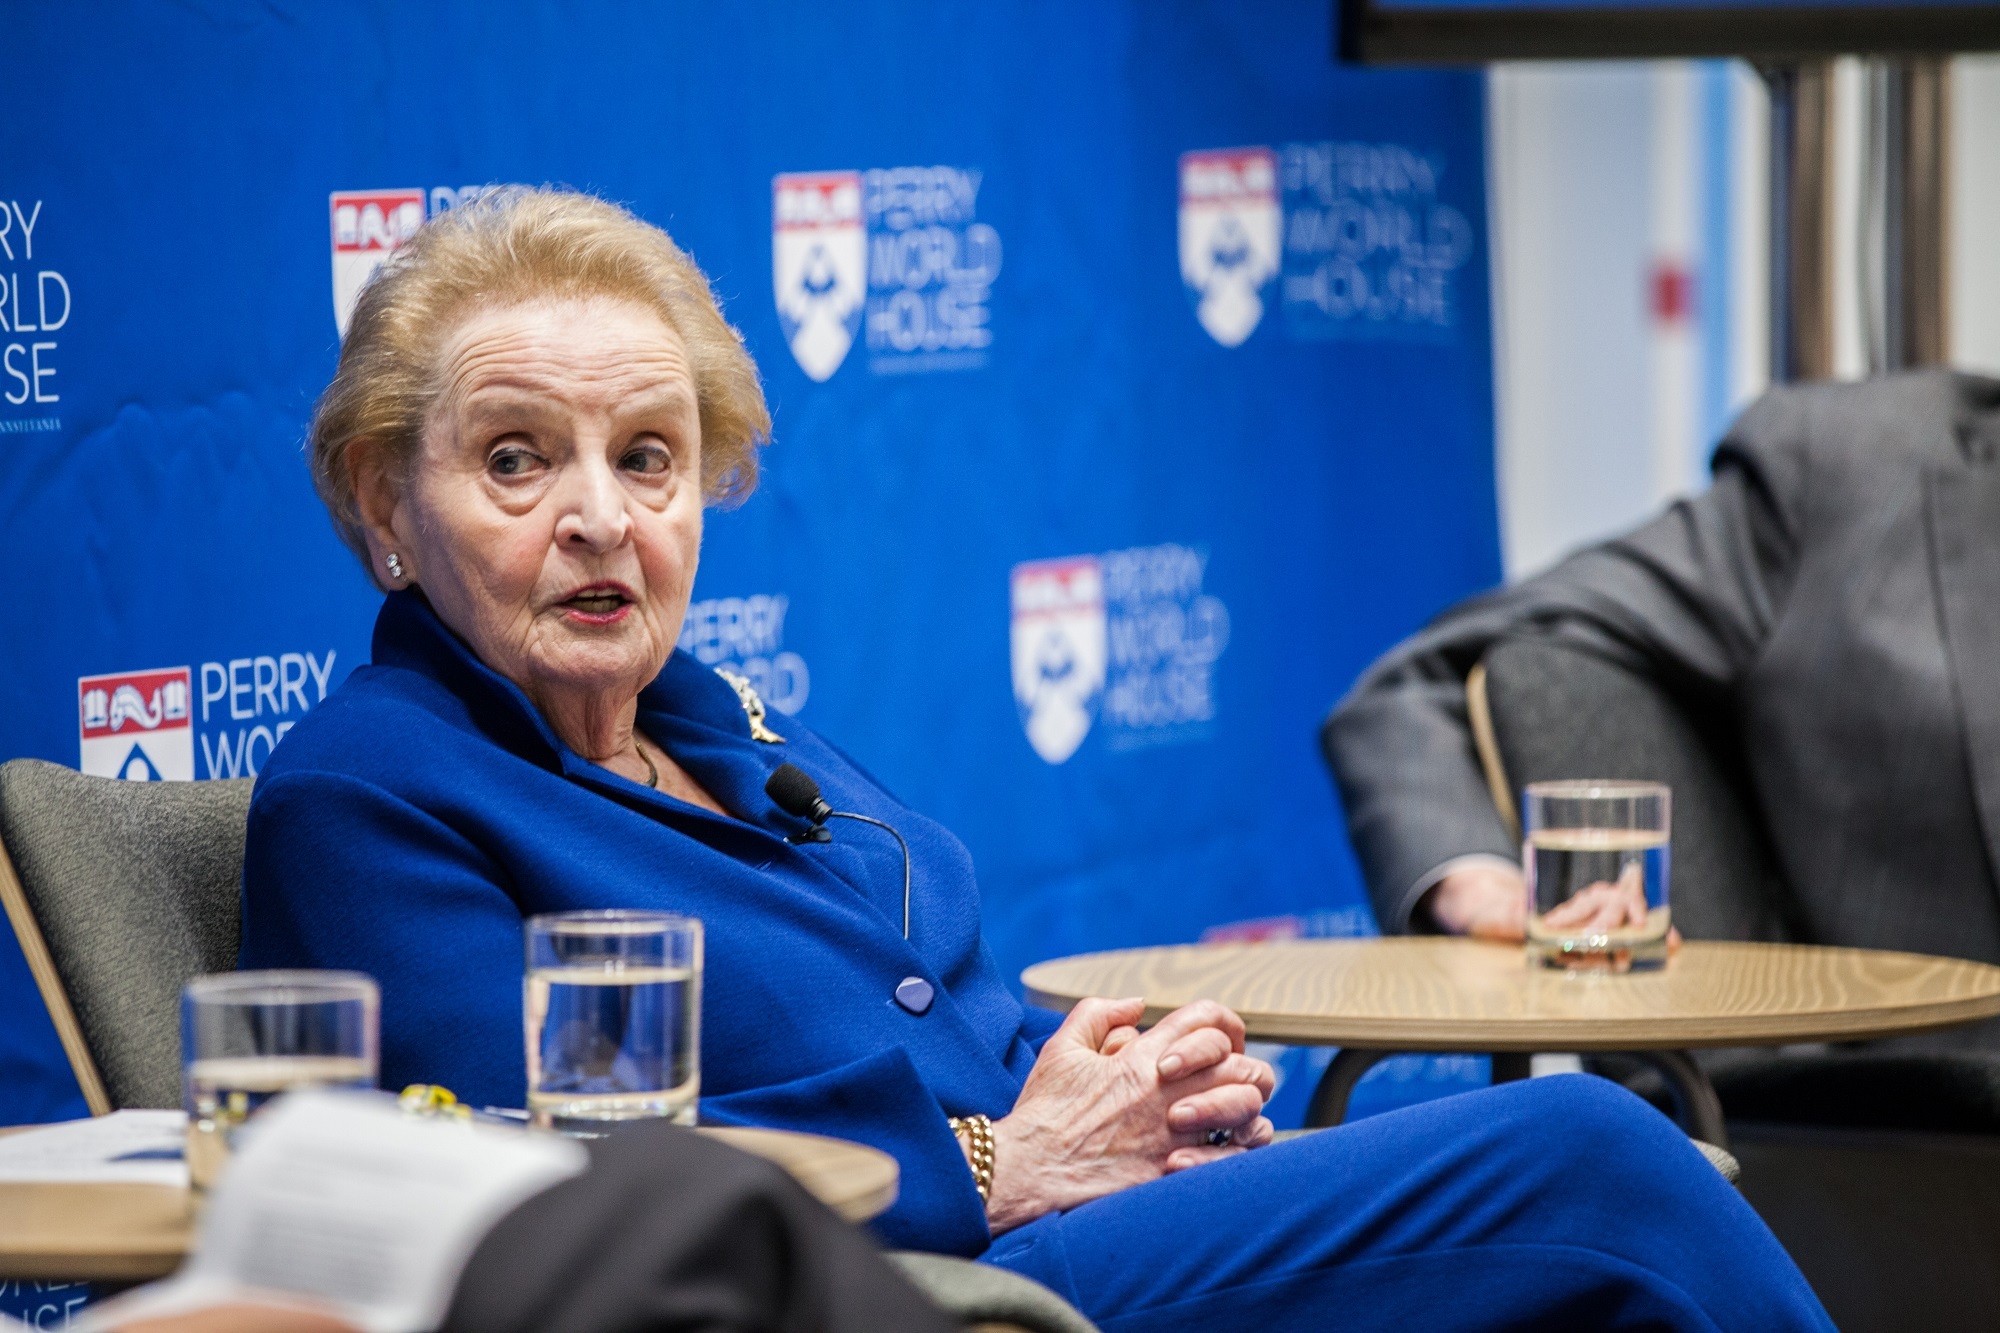 madeline albright at perry world house